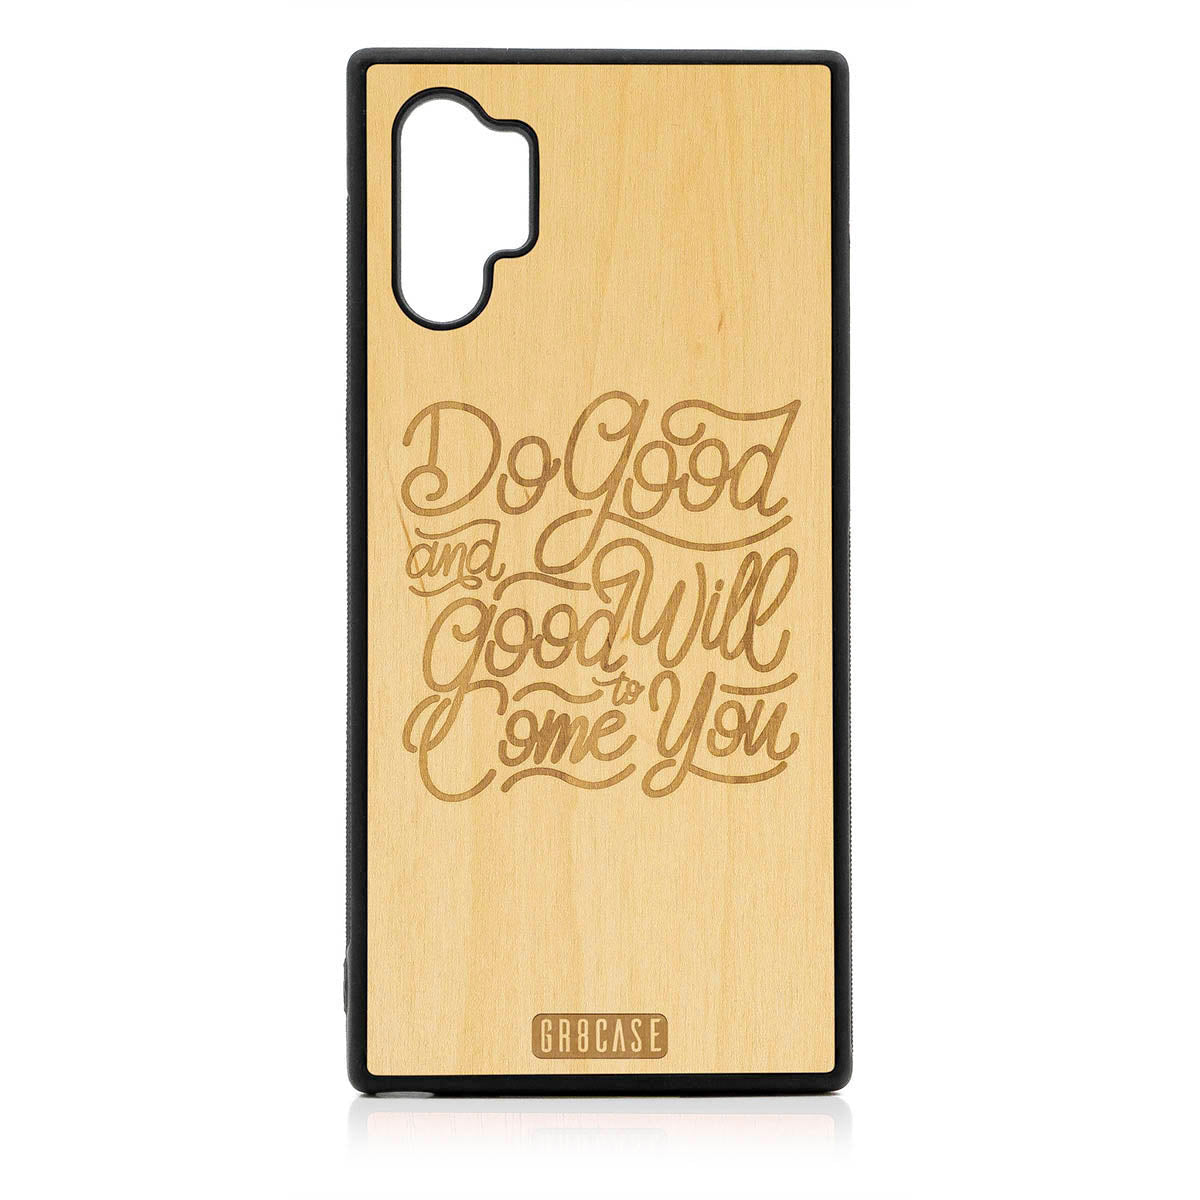 Do Good And Good Will Come To You Design Wood Case For Samsung Galaxy Note 10 Plus by GR8CASE